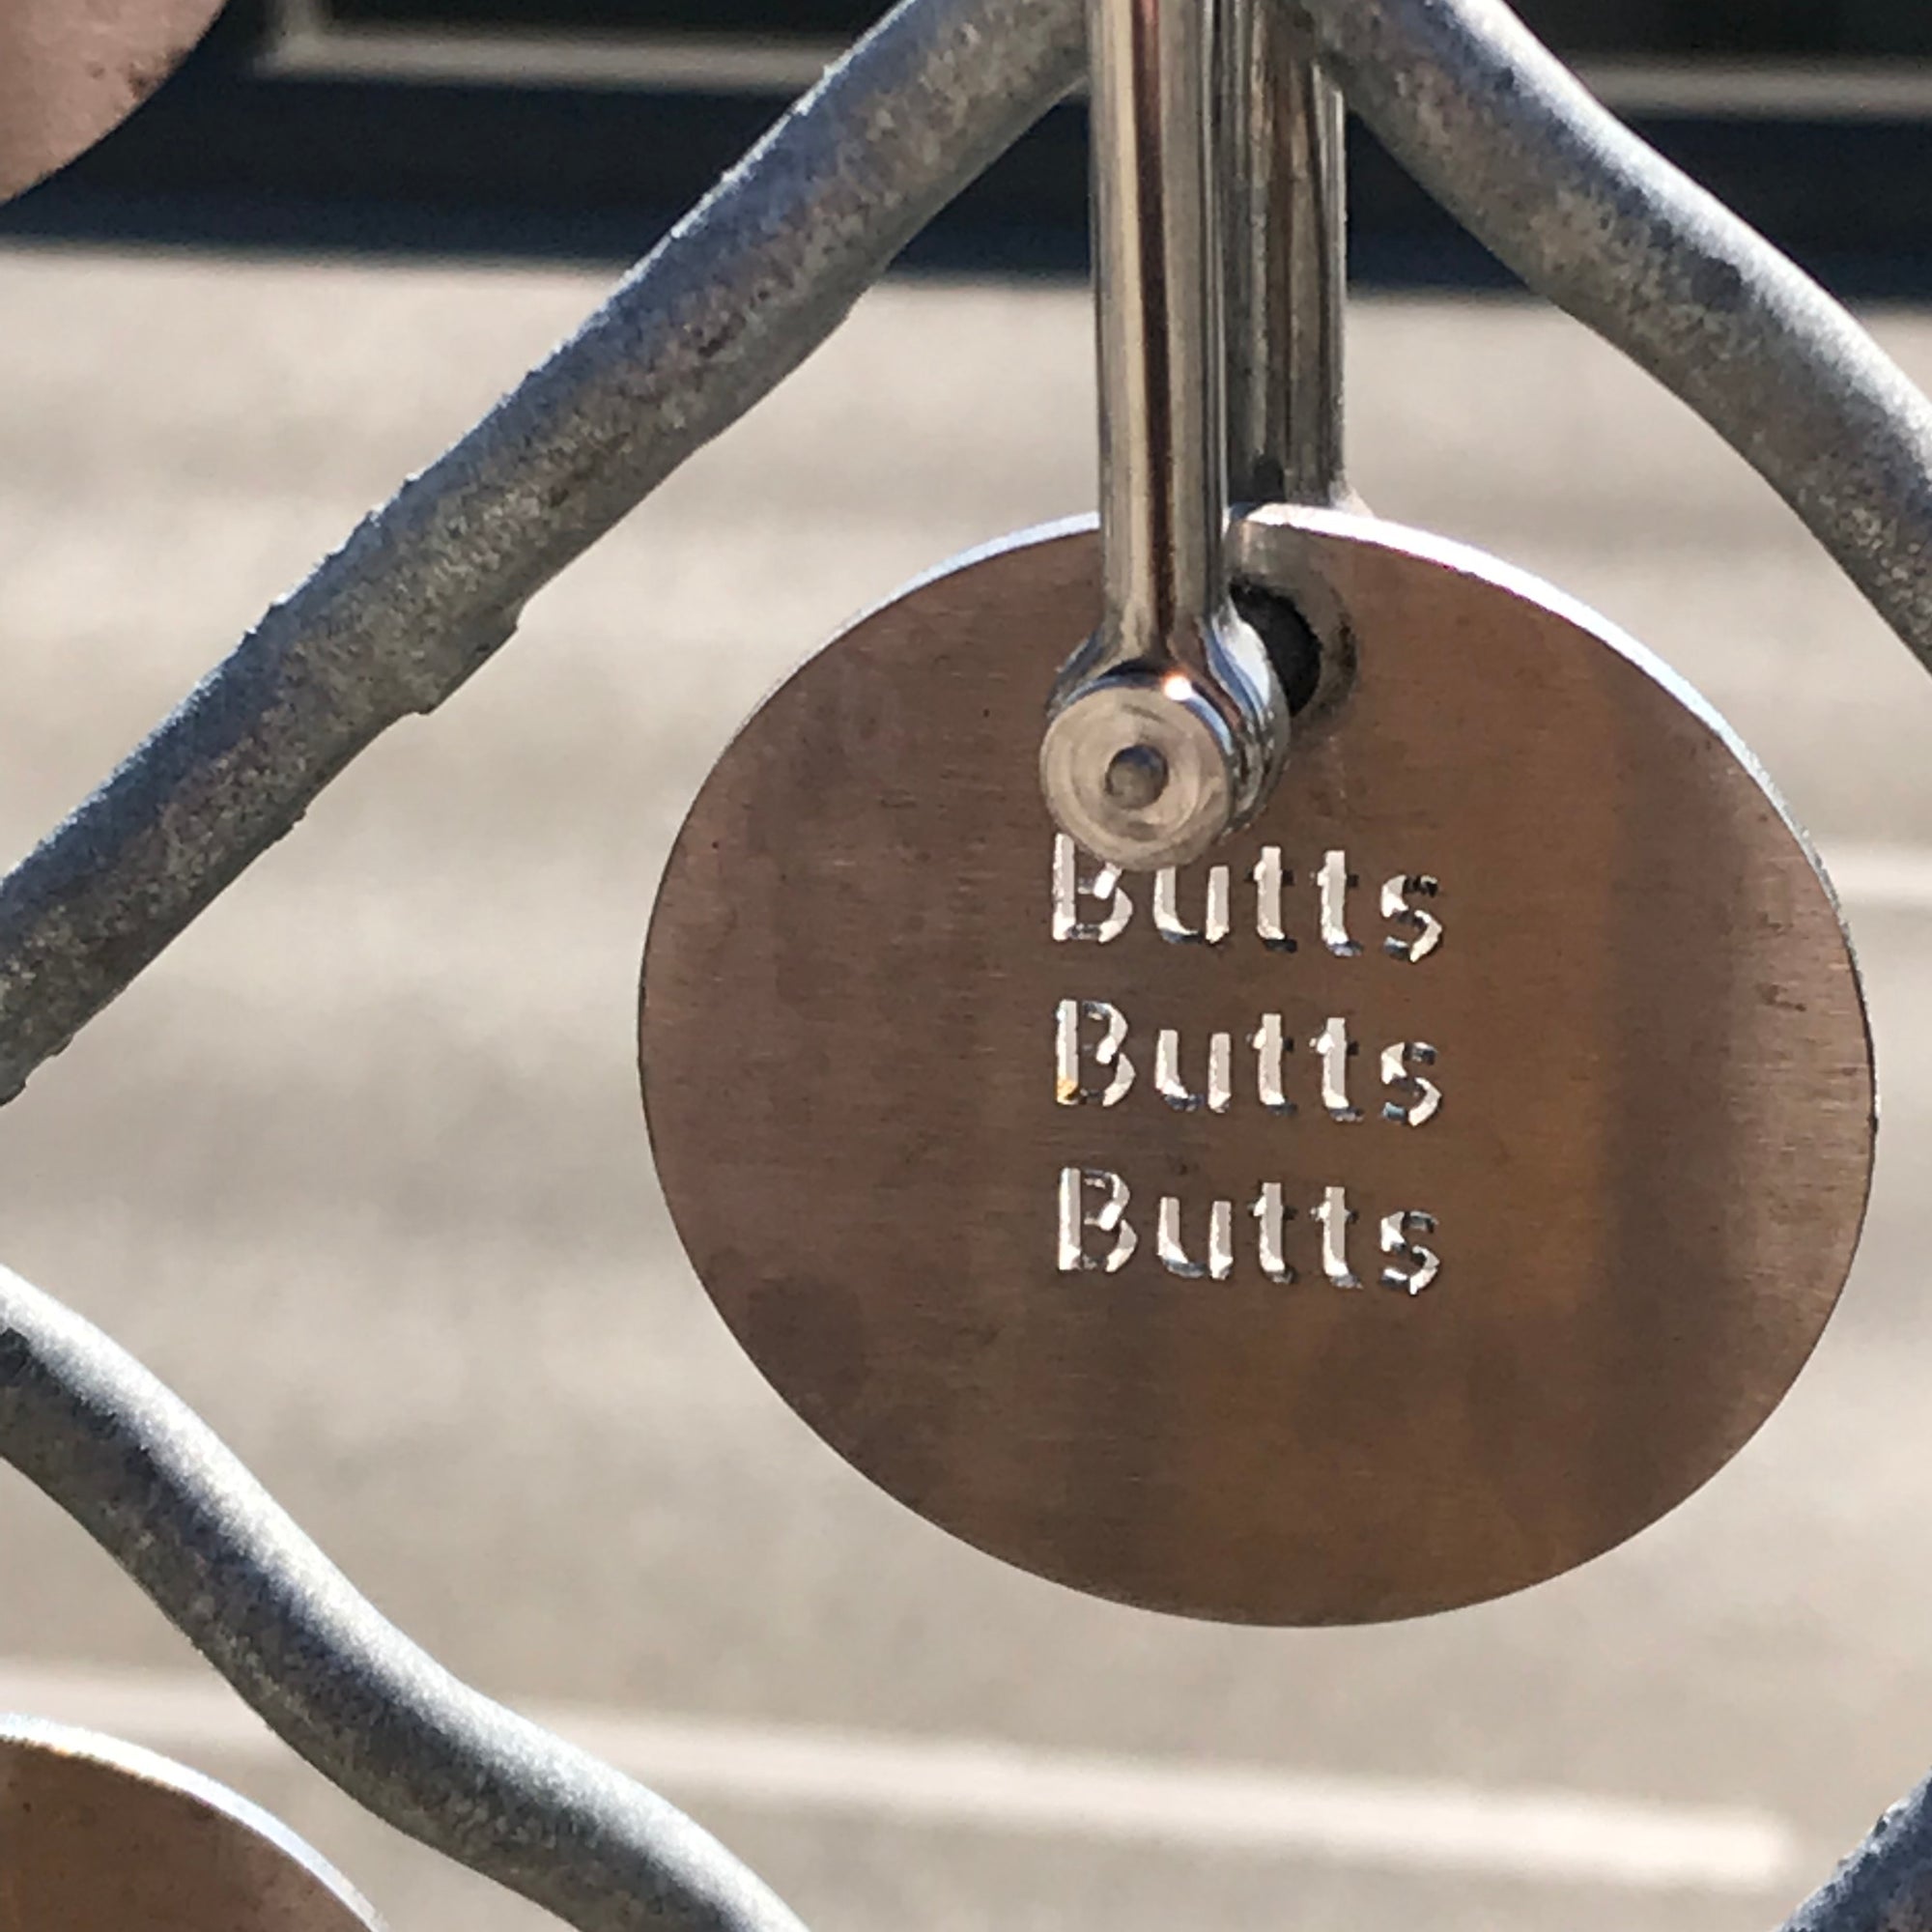 Charm hanging on a fence that says "Butts Butts Butts"